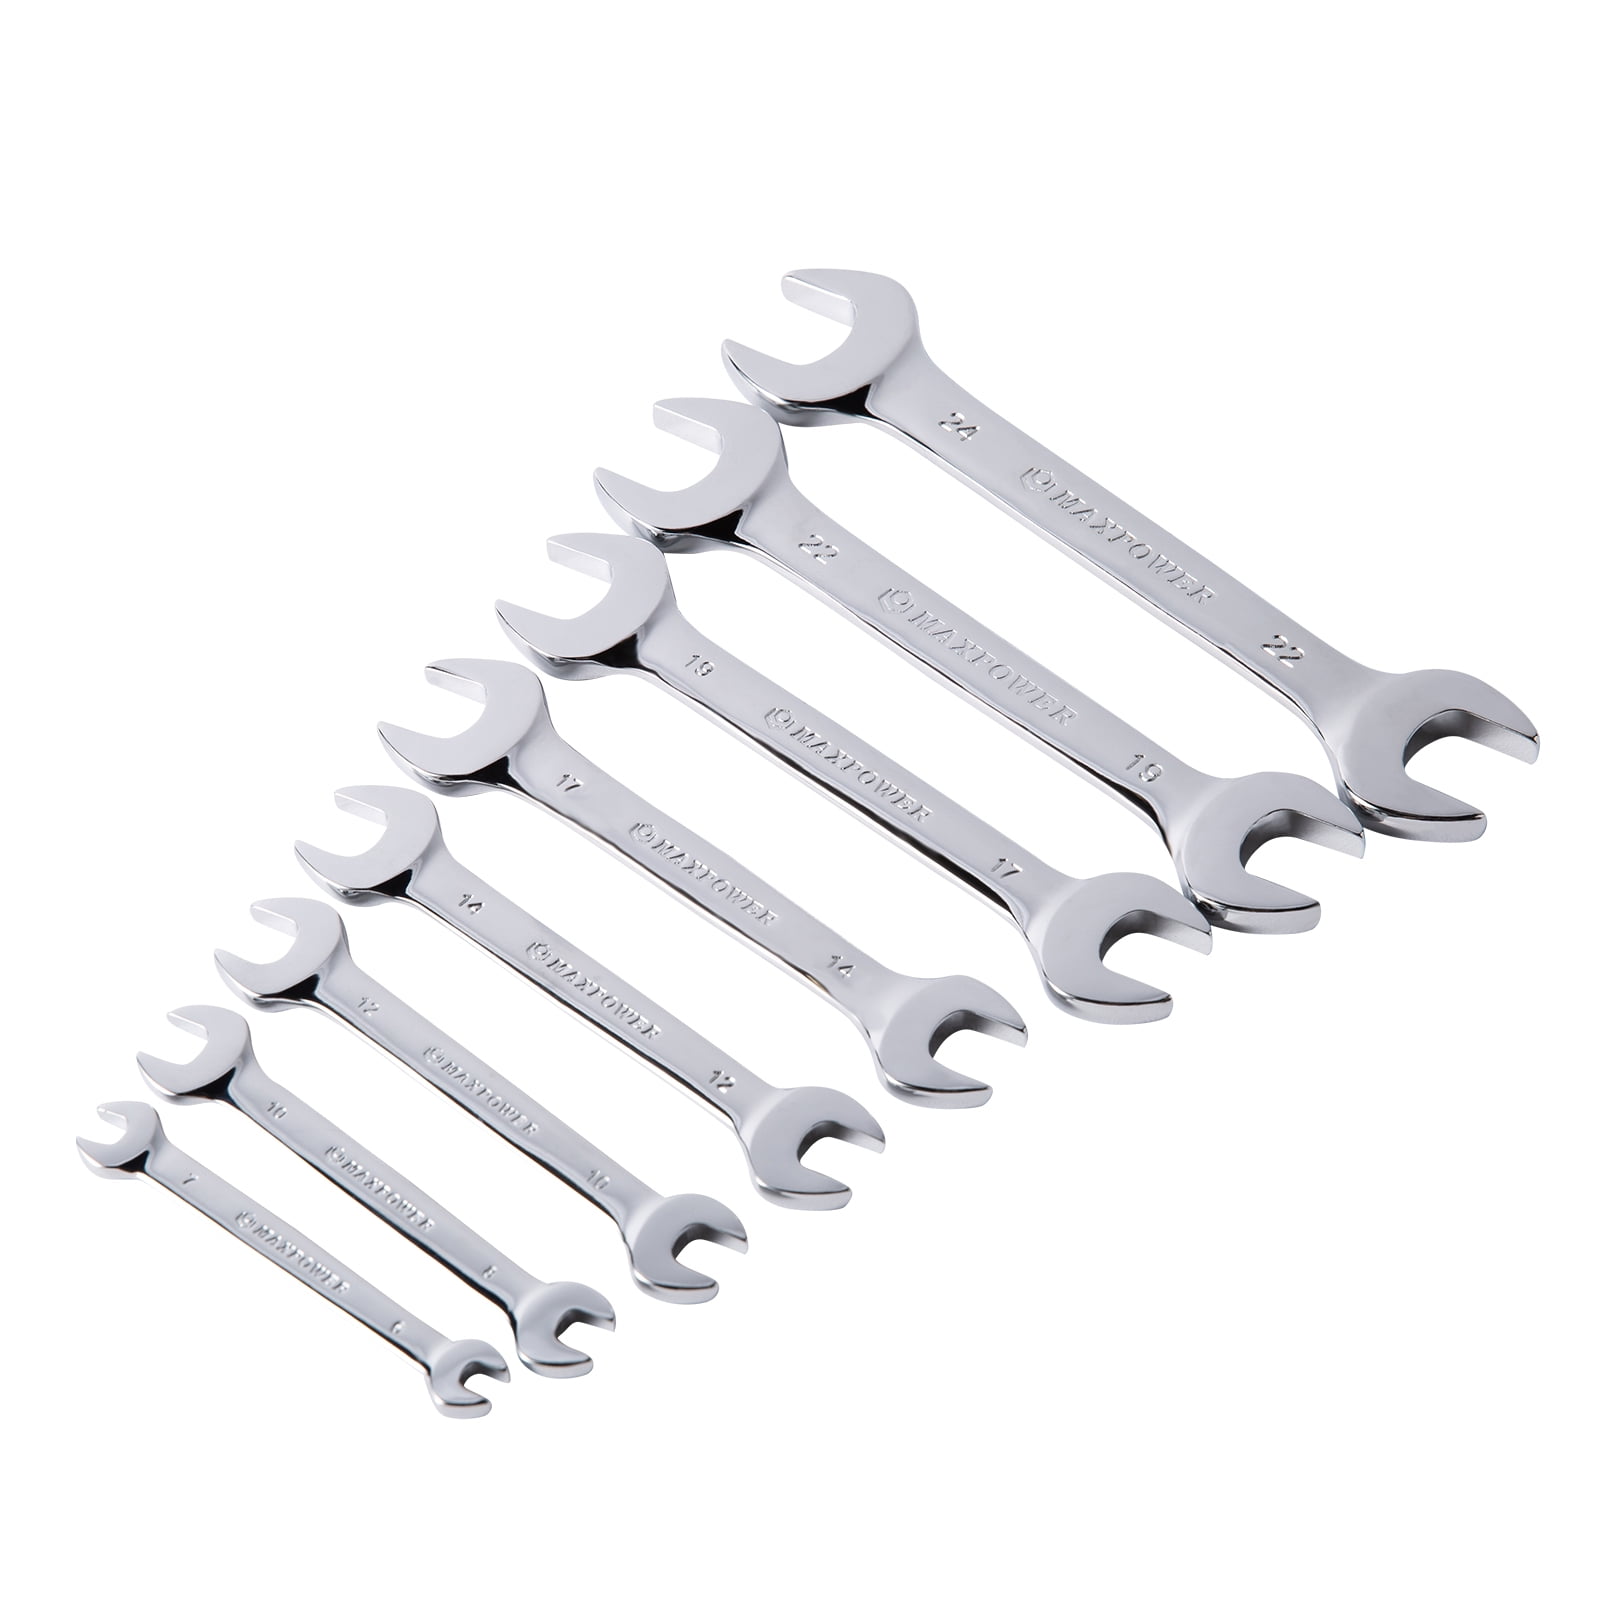 SAE Trepot 9 Piece 12 Point durable Combination Wrench Set,Open End and Box End Wrench Set with Rolling Pouch. Size range :1/4 to 3/4 Chrome plated 